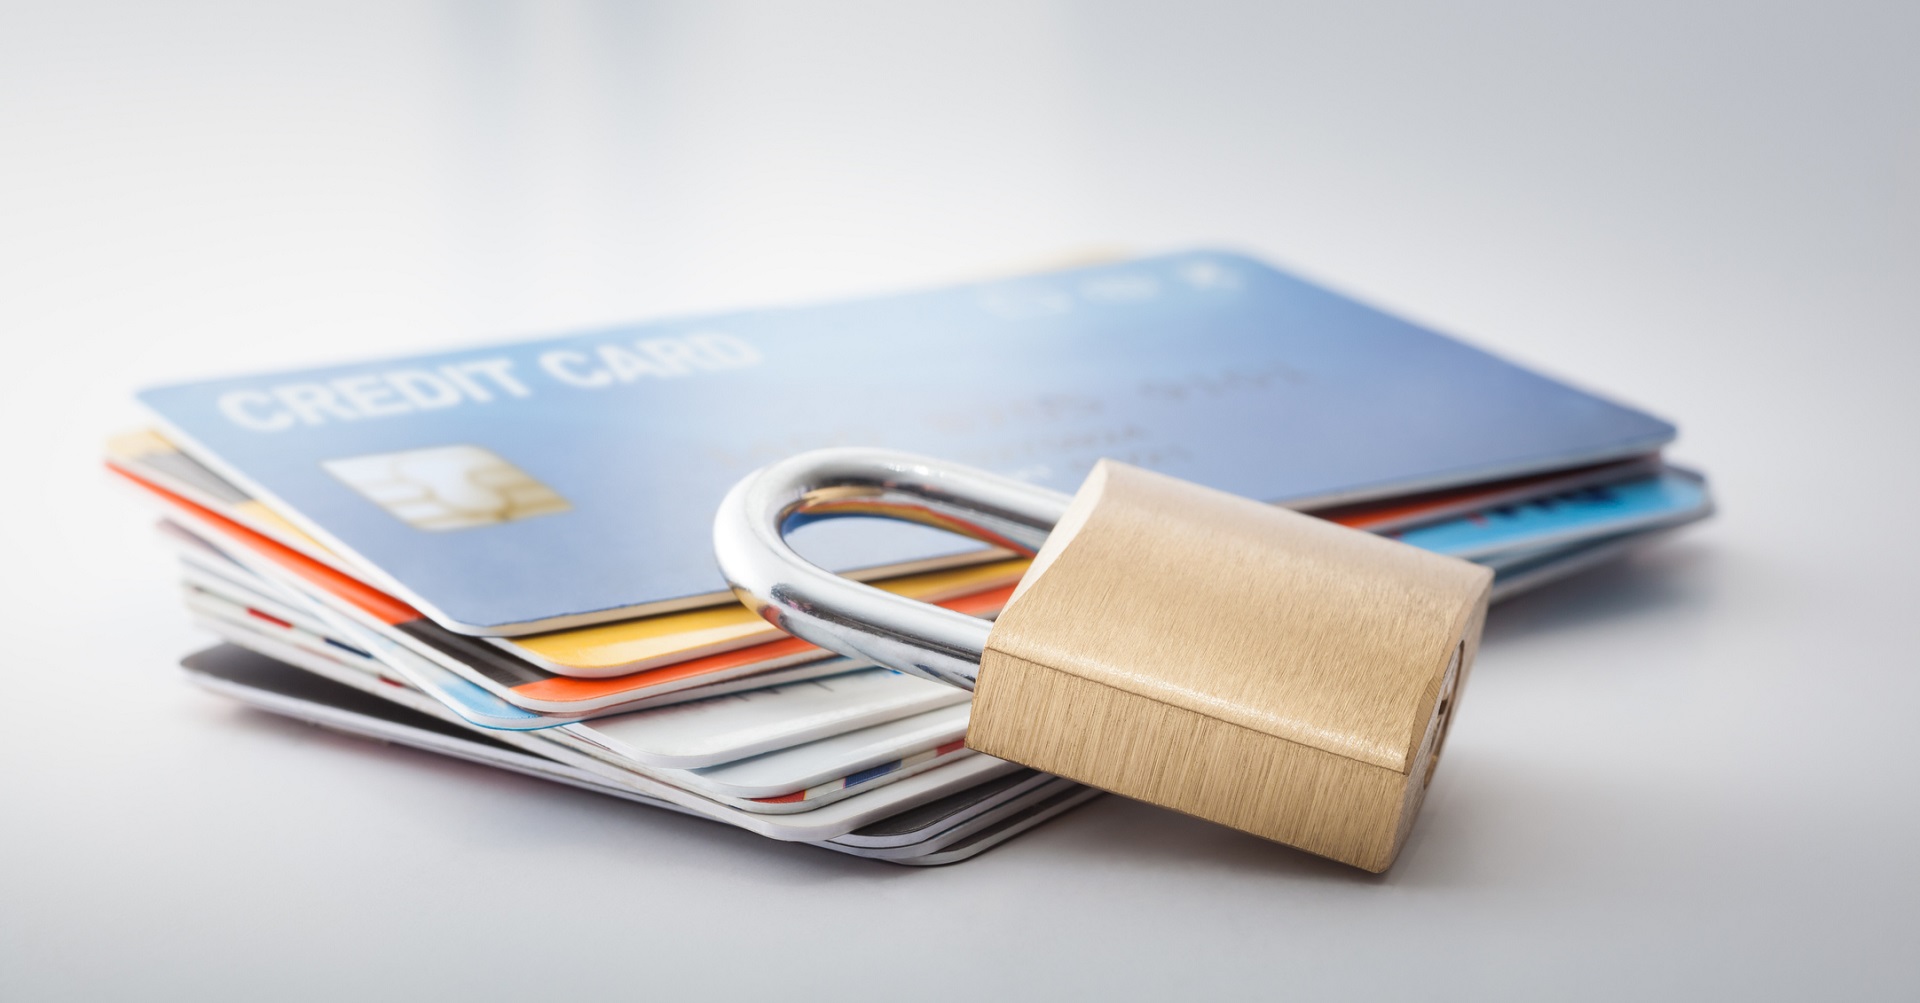 credit cards on table with padlock